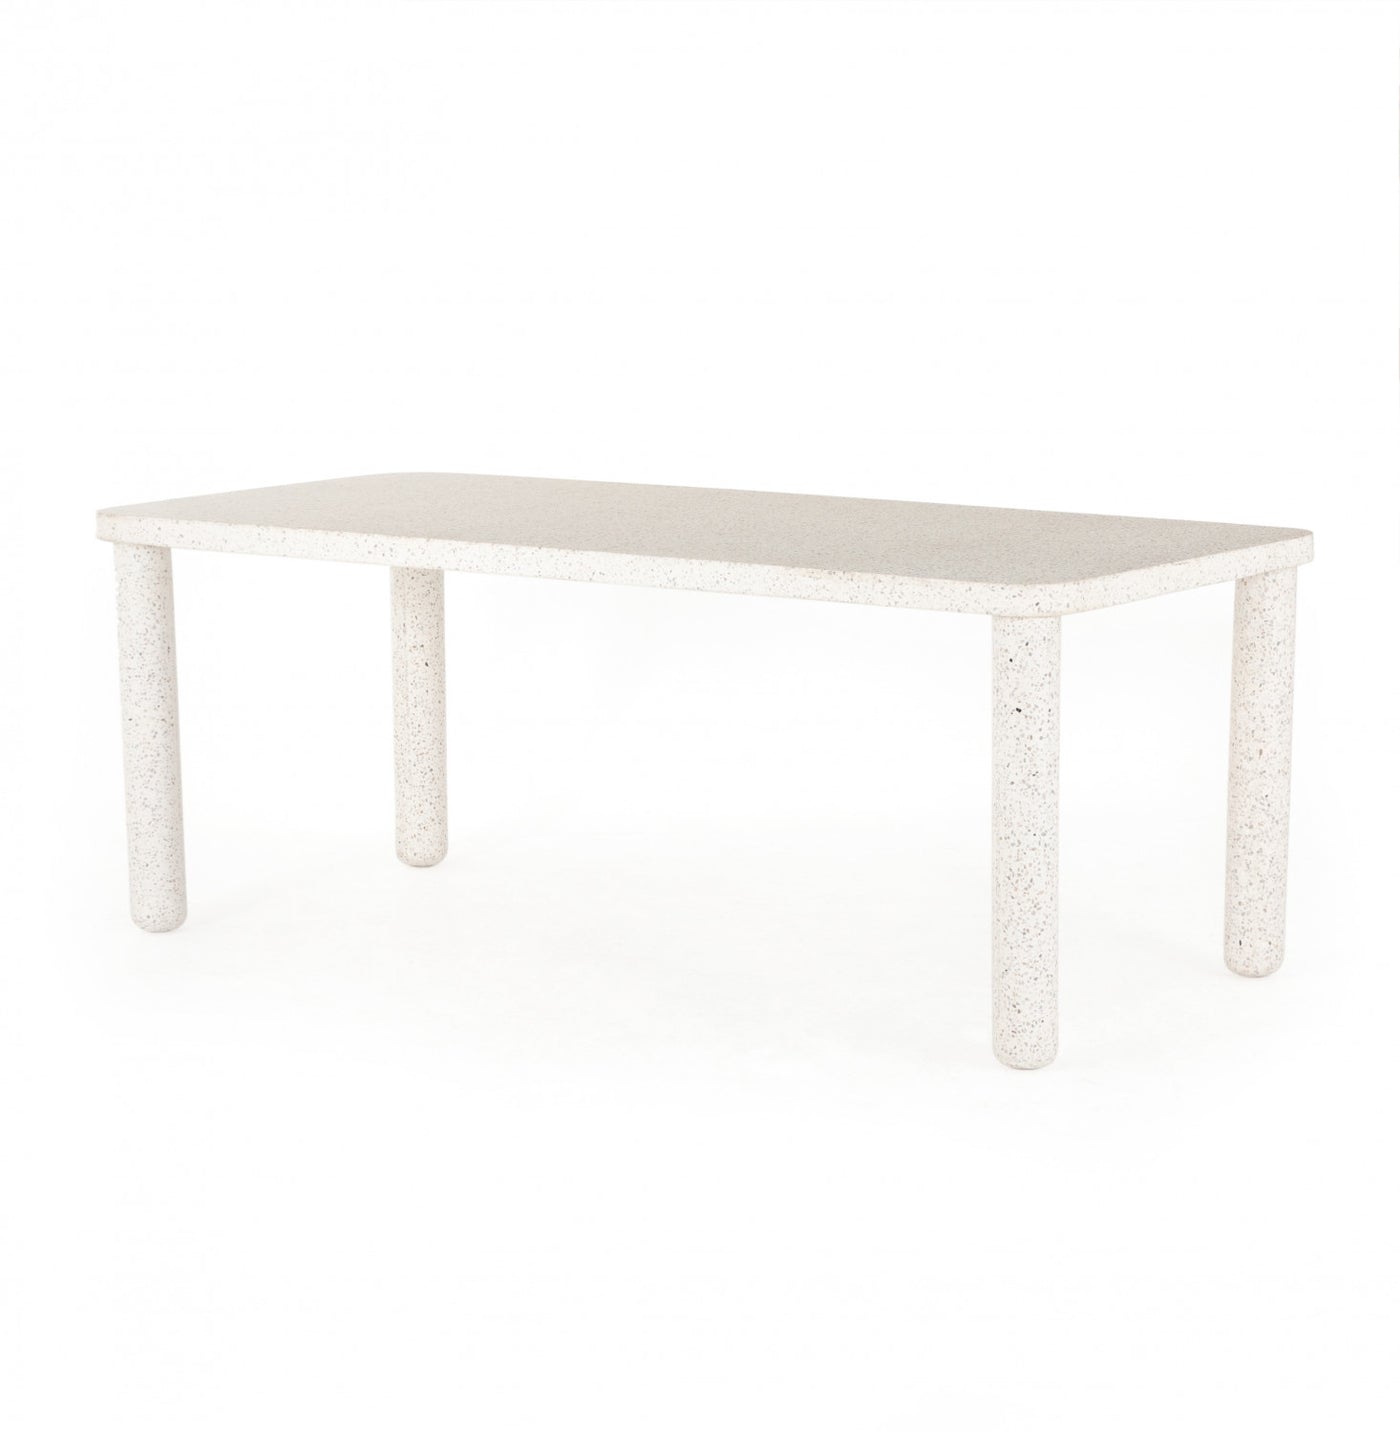 WINSLOW OUTDOOR DINING TABLE-79"-CREAM